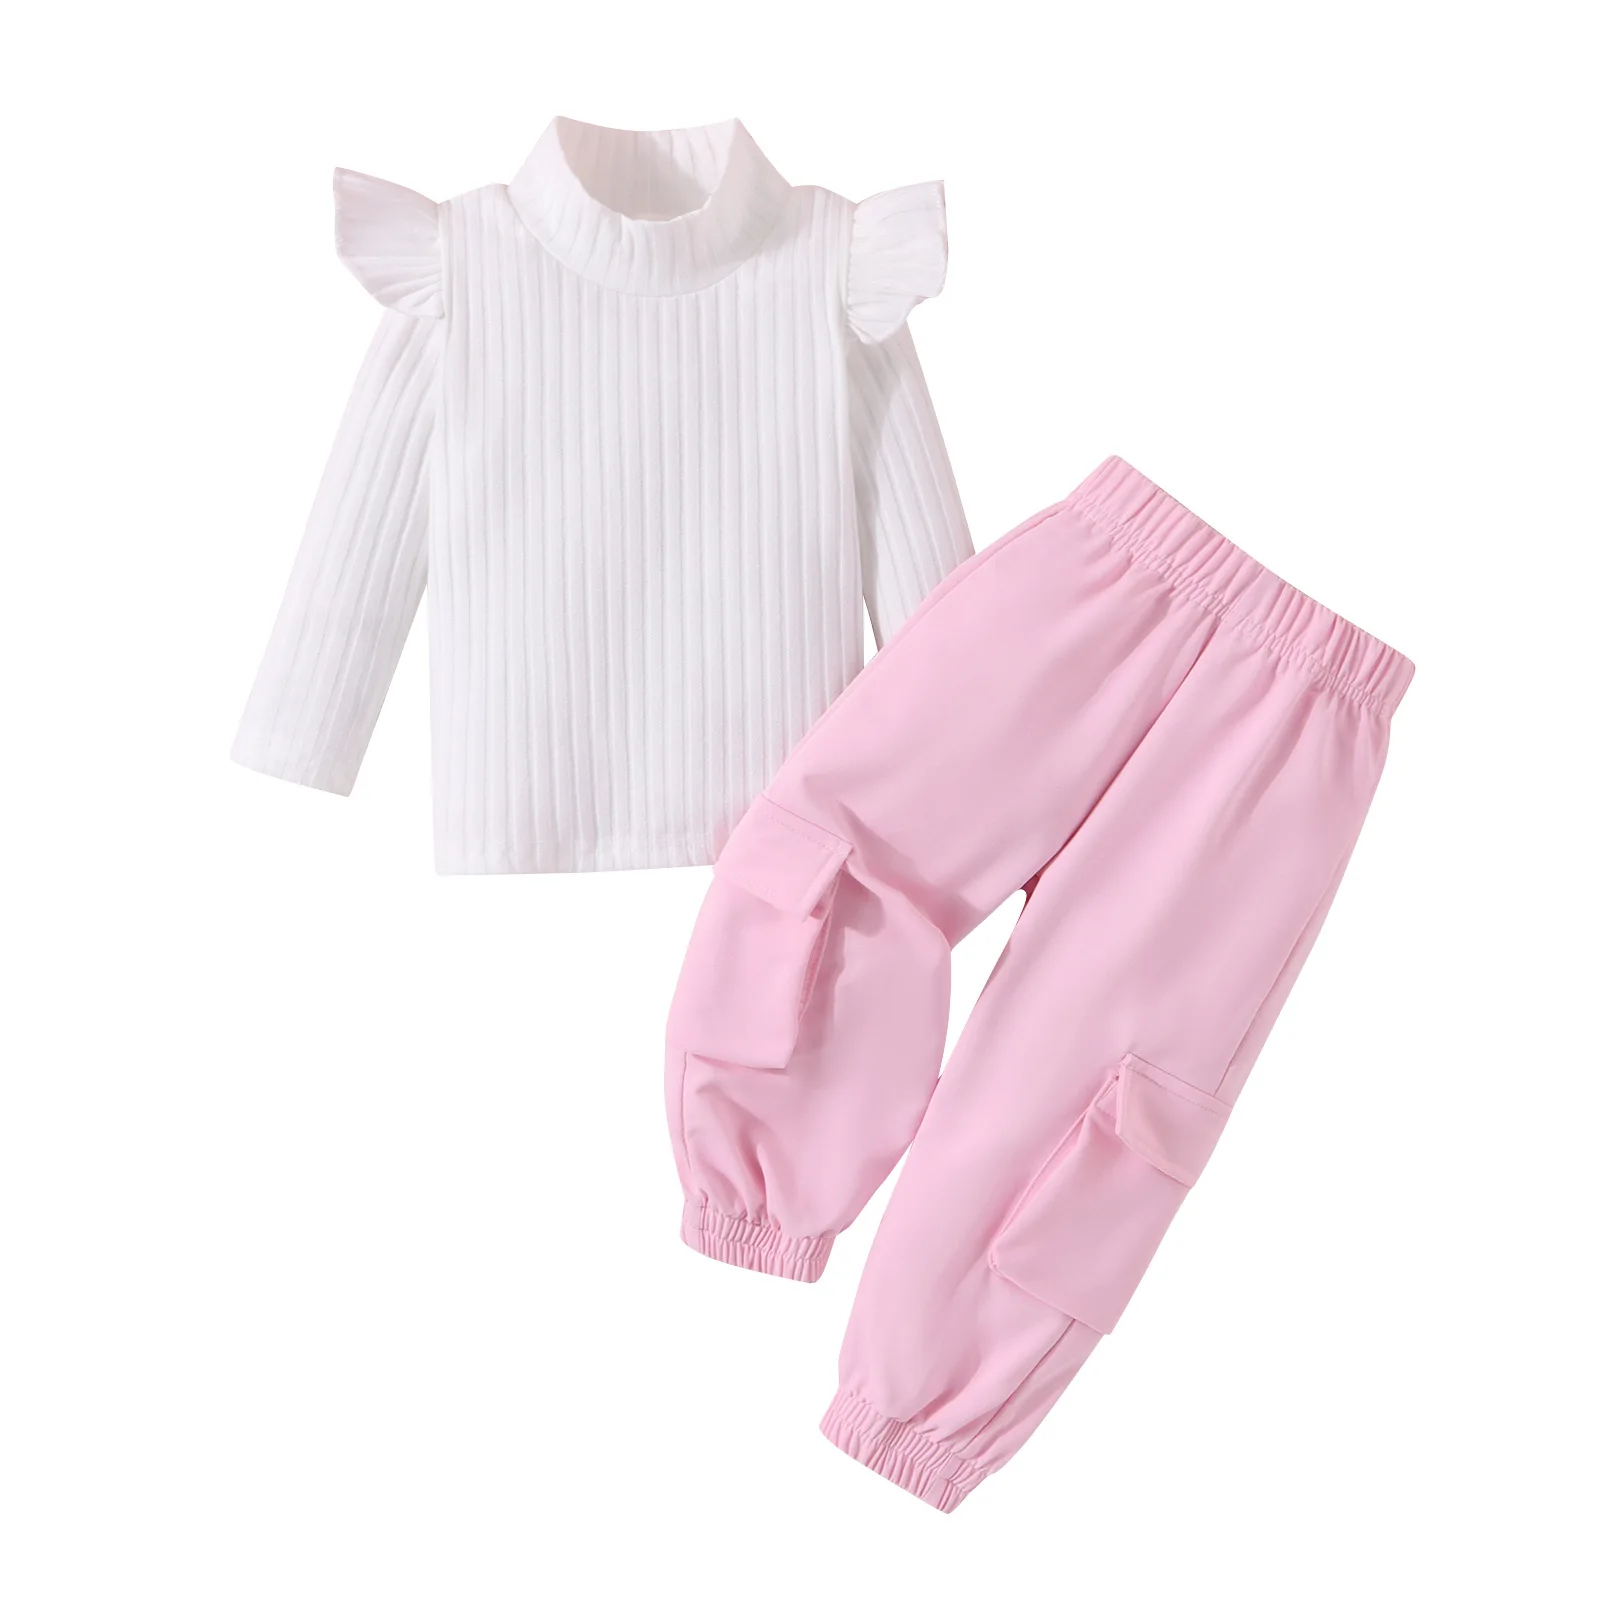 RTS new autumn girls clothing long sleeve t-shirt matching fashion trousers toddler children two piece clothes for kids